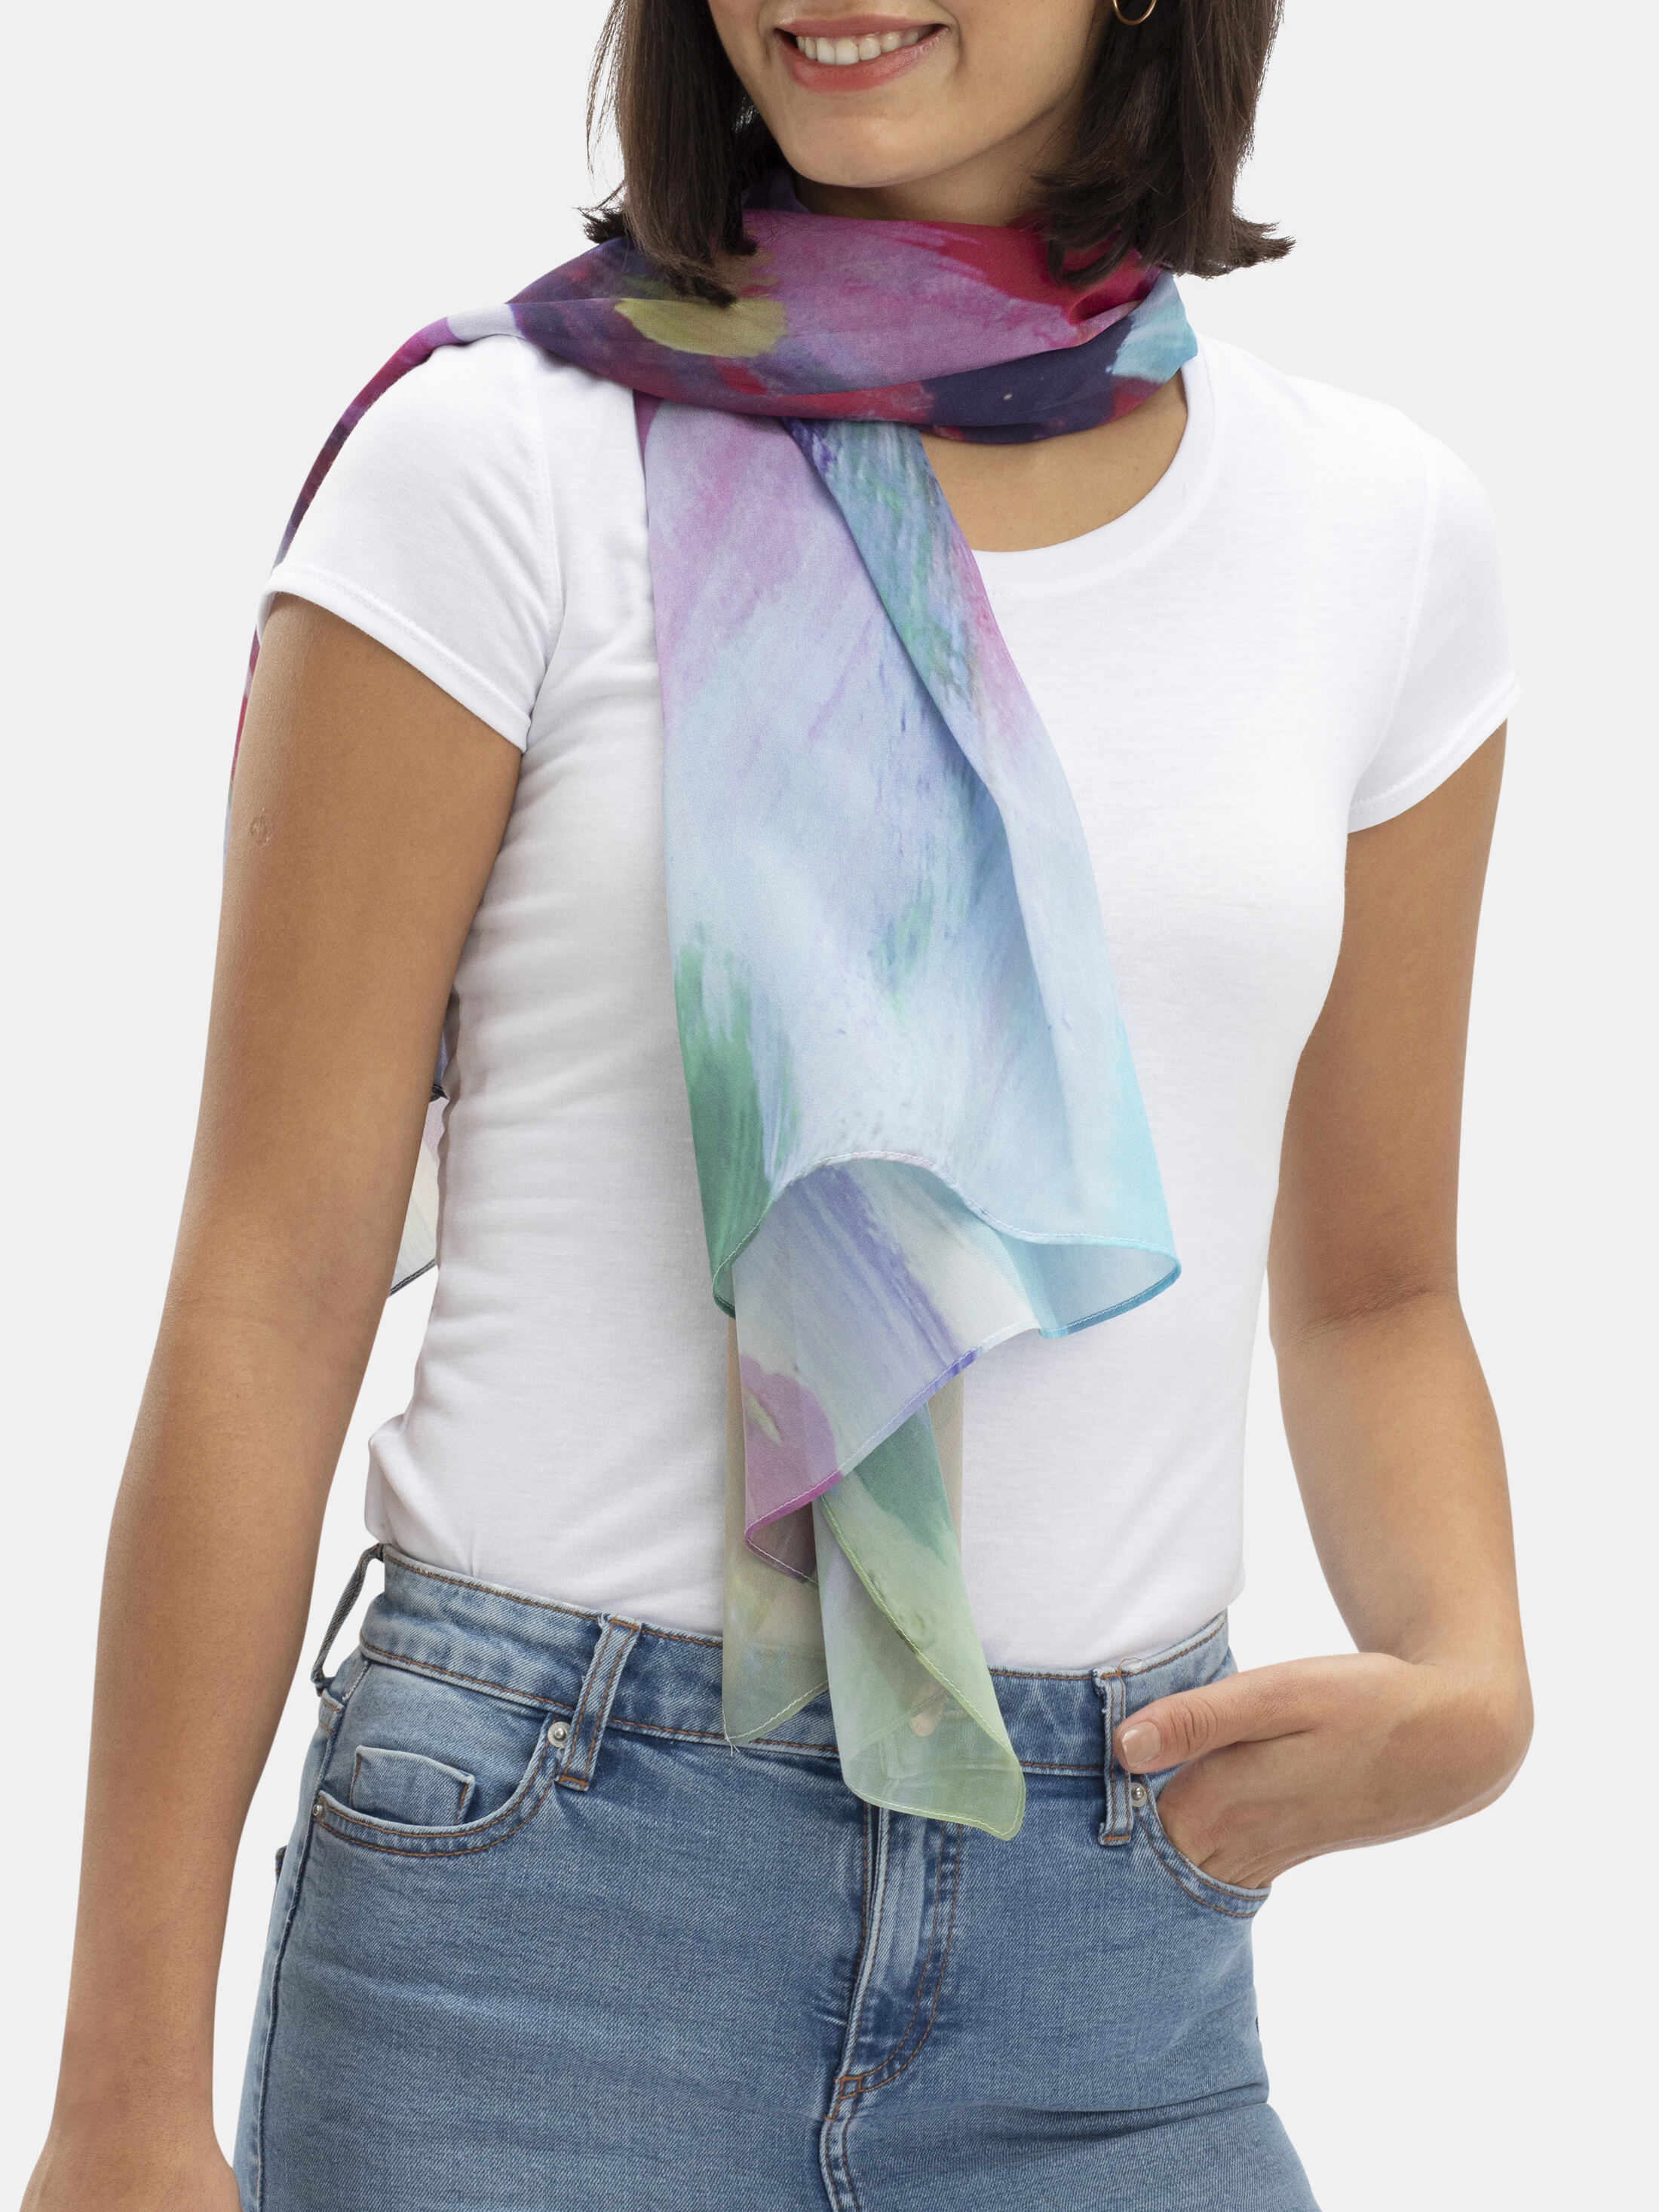 Fashion Scarfs for Women Girl Boy Abstract Pattern Silk Scarves Long Lightweight Shawl Wrap for Face Cover Neck Warmer